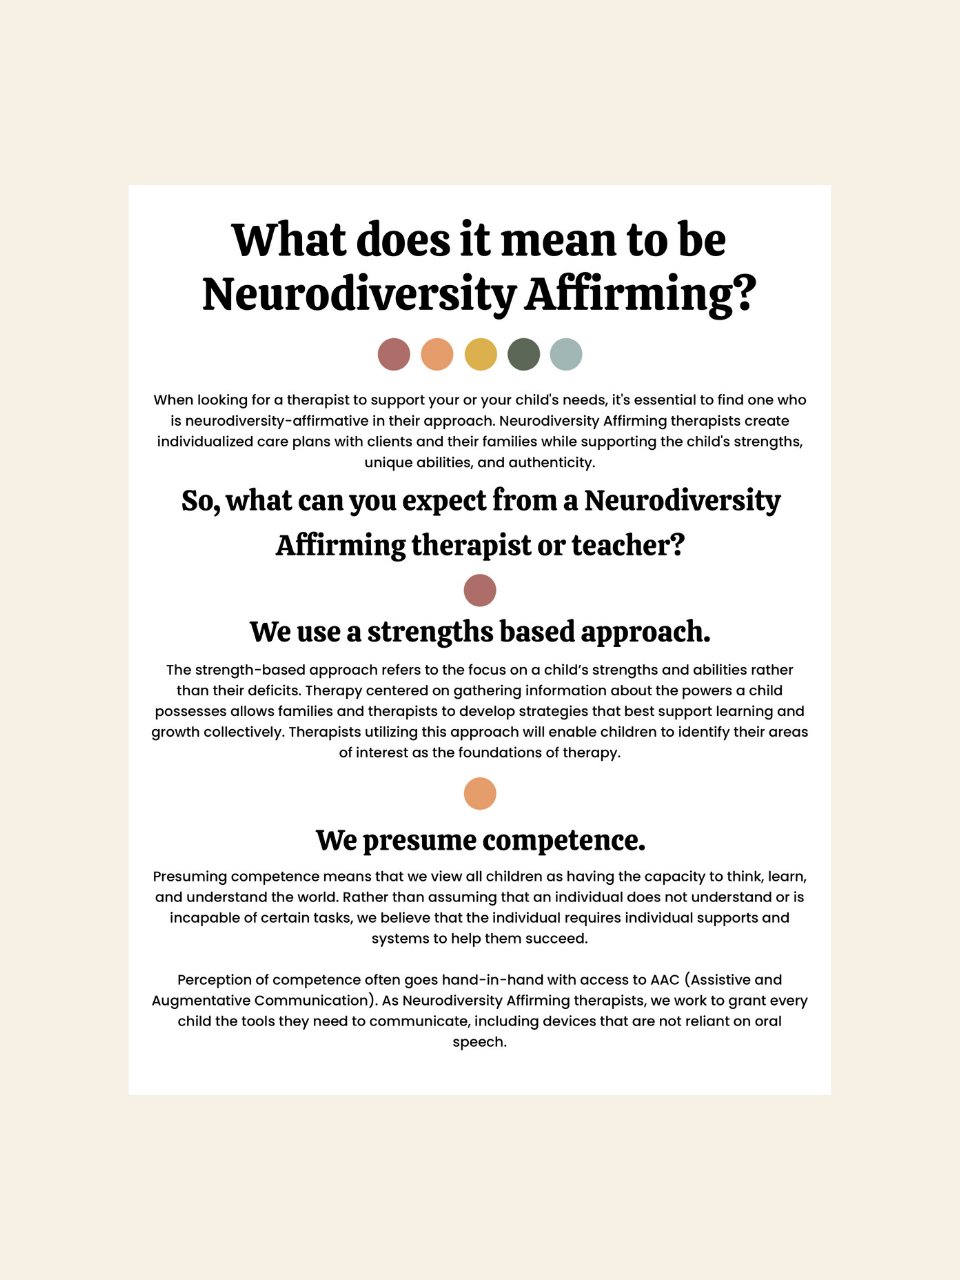 What does it mean to be Neurodiversity Affirming?